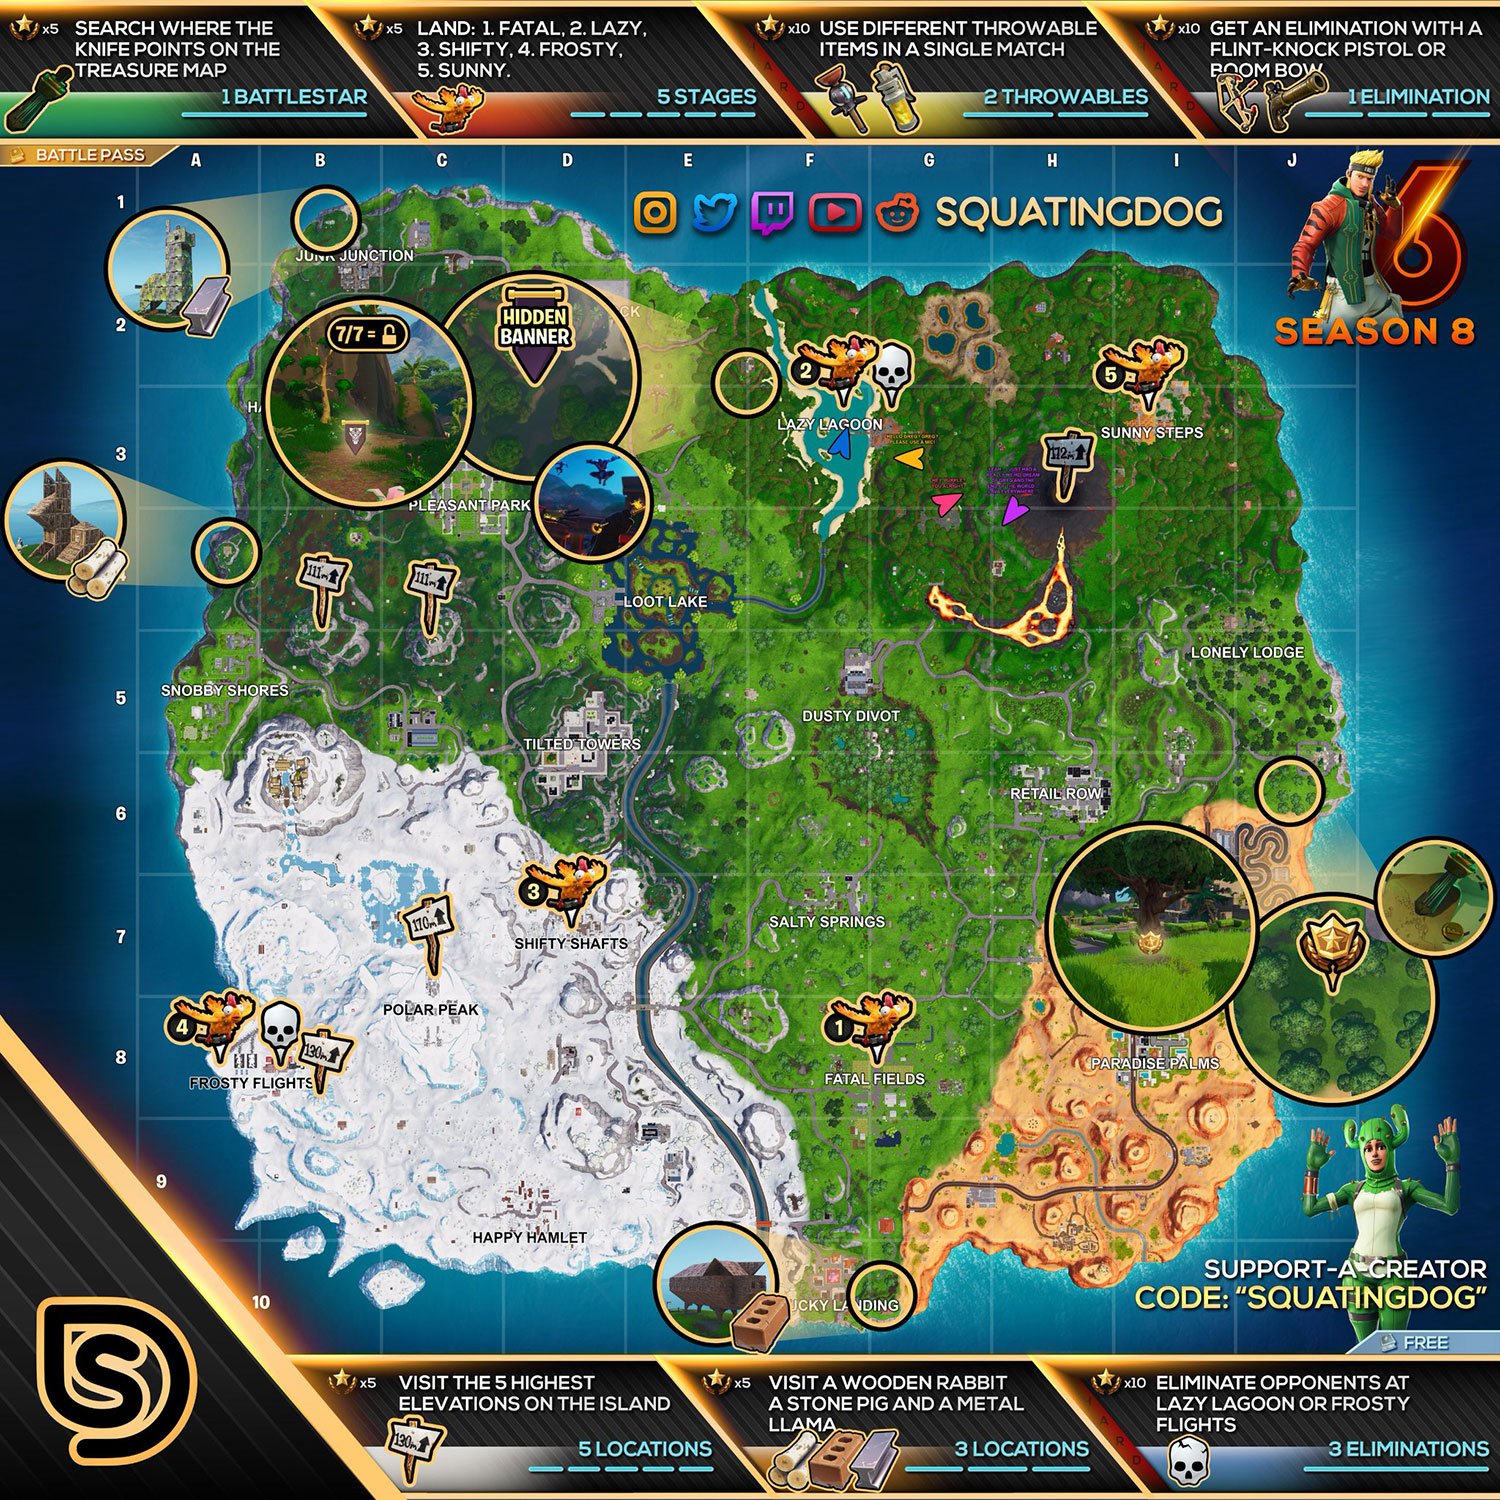 fortnite season 8 week 6 cheat sheet if you want to check at where to find all the challenges here s a cheat sheet for you check below for more detailed - week 6 challenges fortnite season 7 cheat sheet